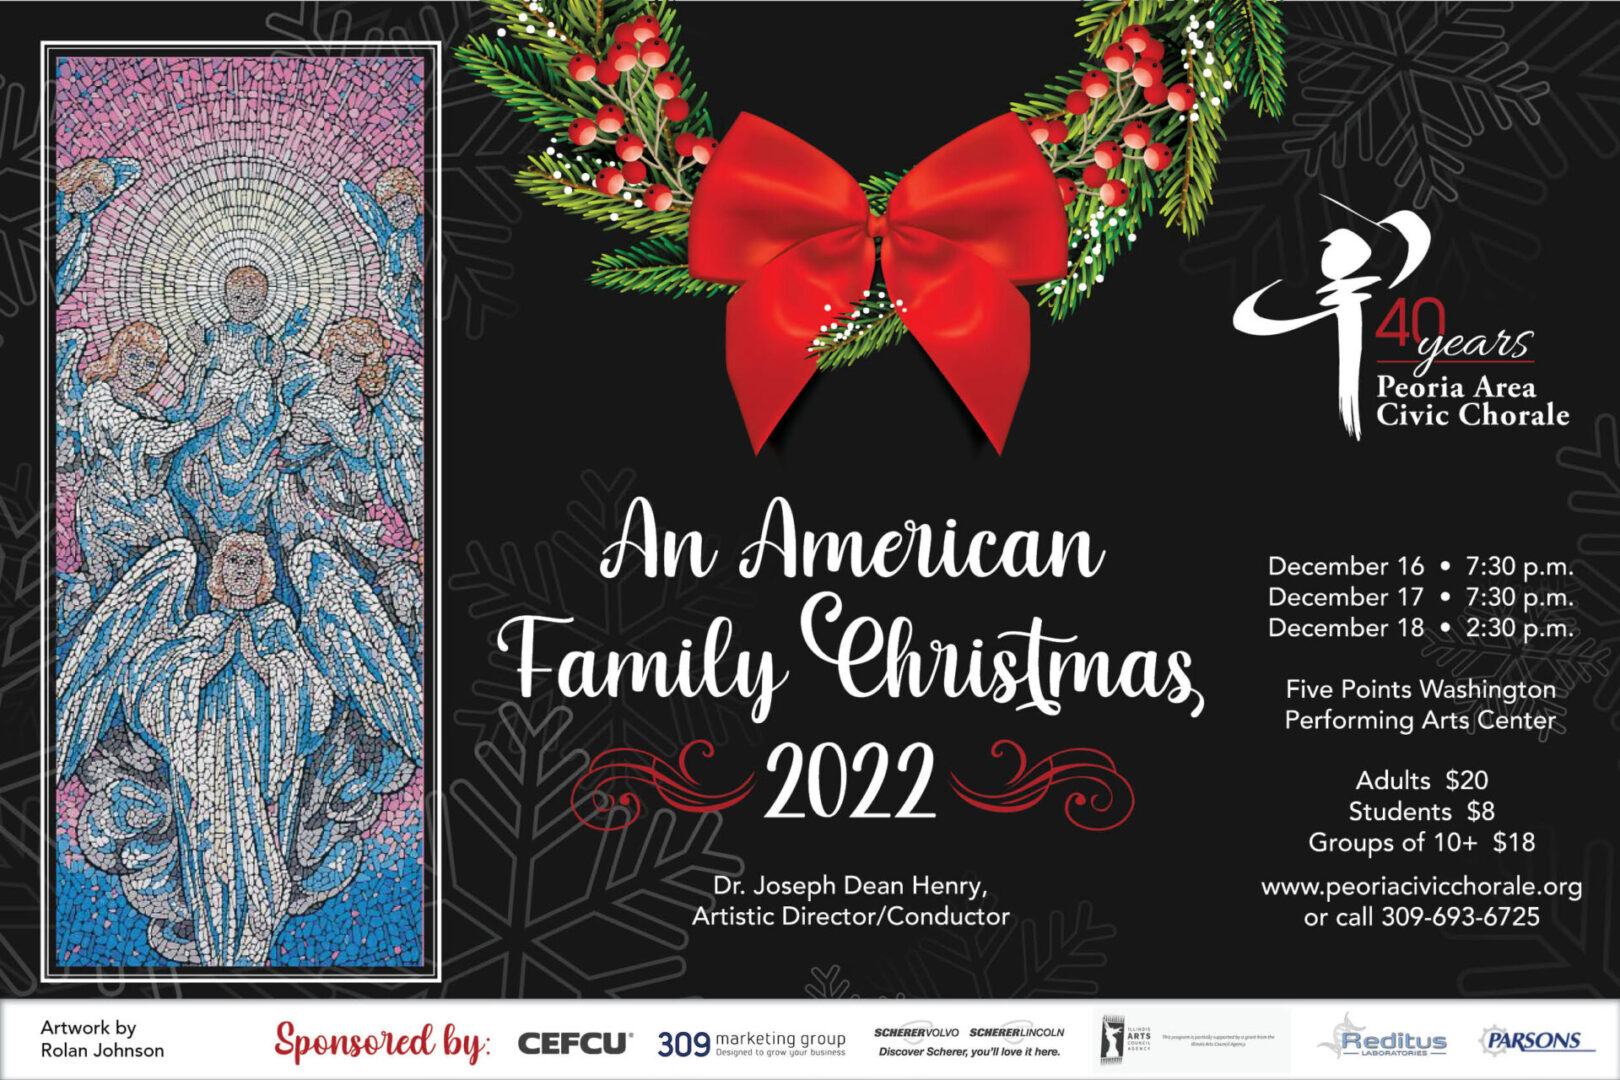 An American family Christmas event information